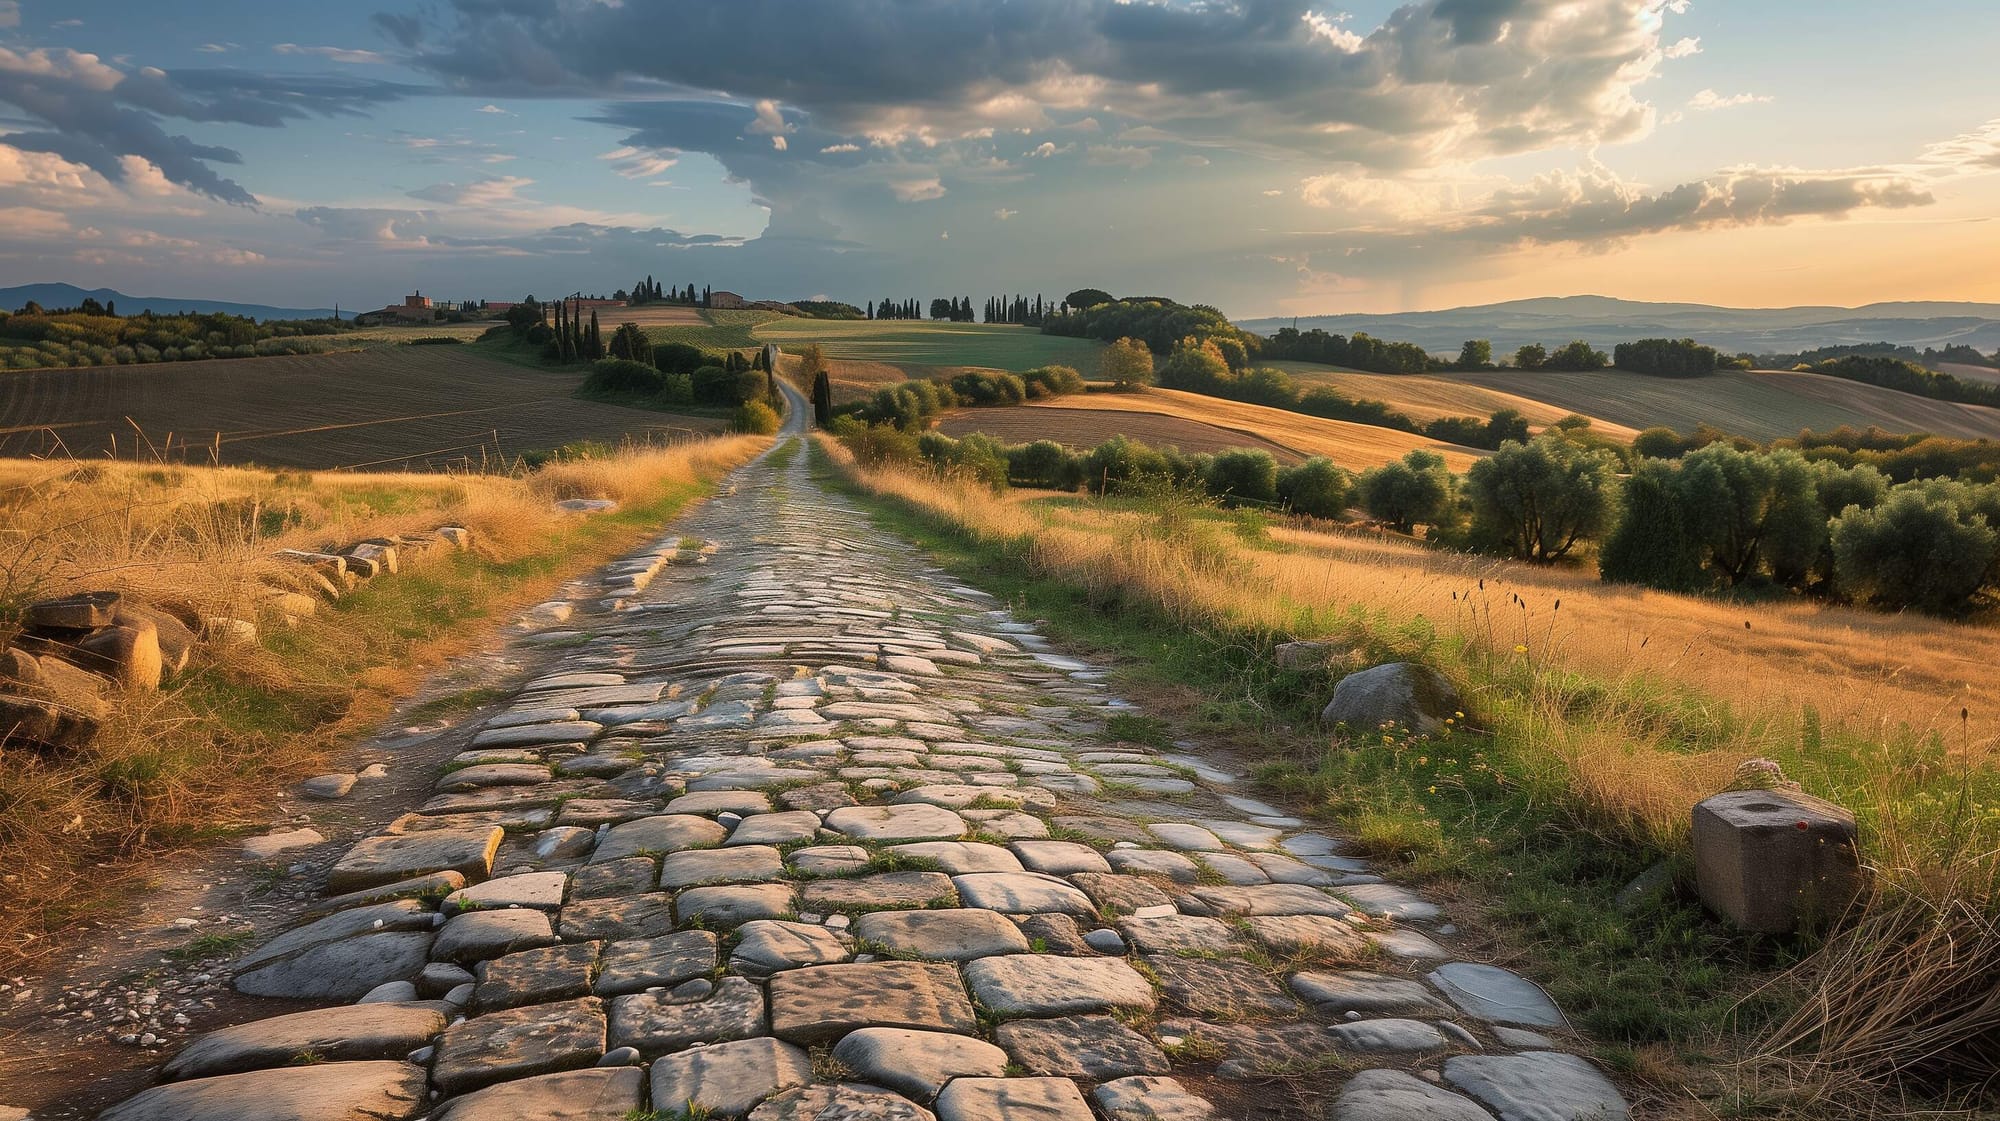 A typical early Roman road, in the Tuscan countryside